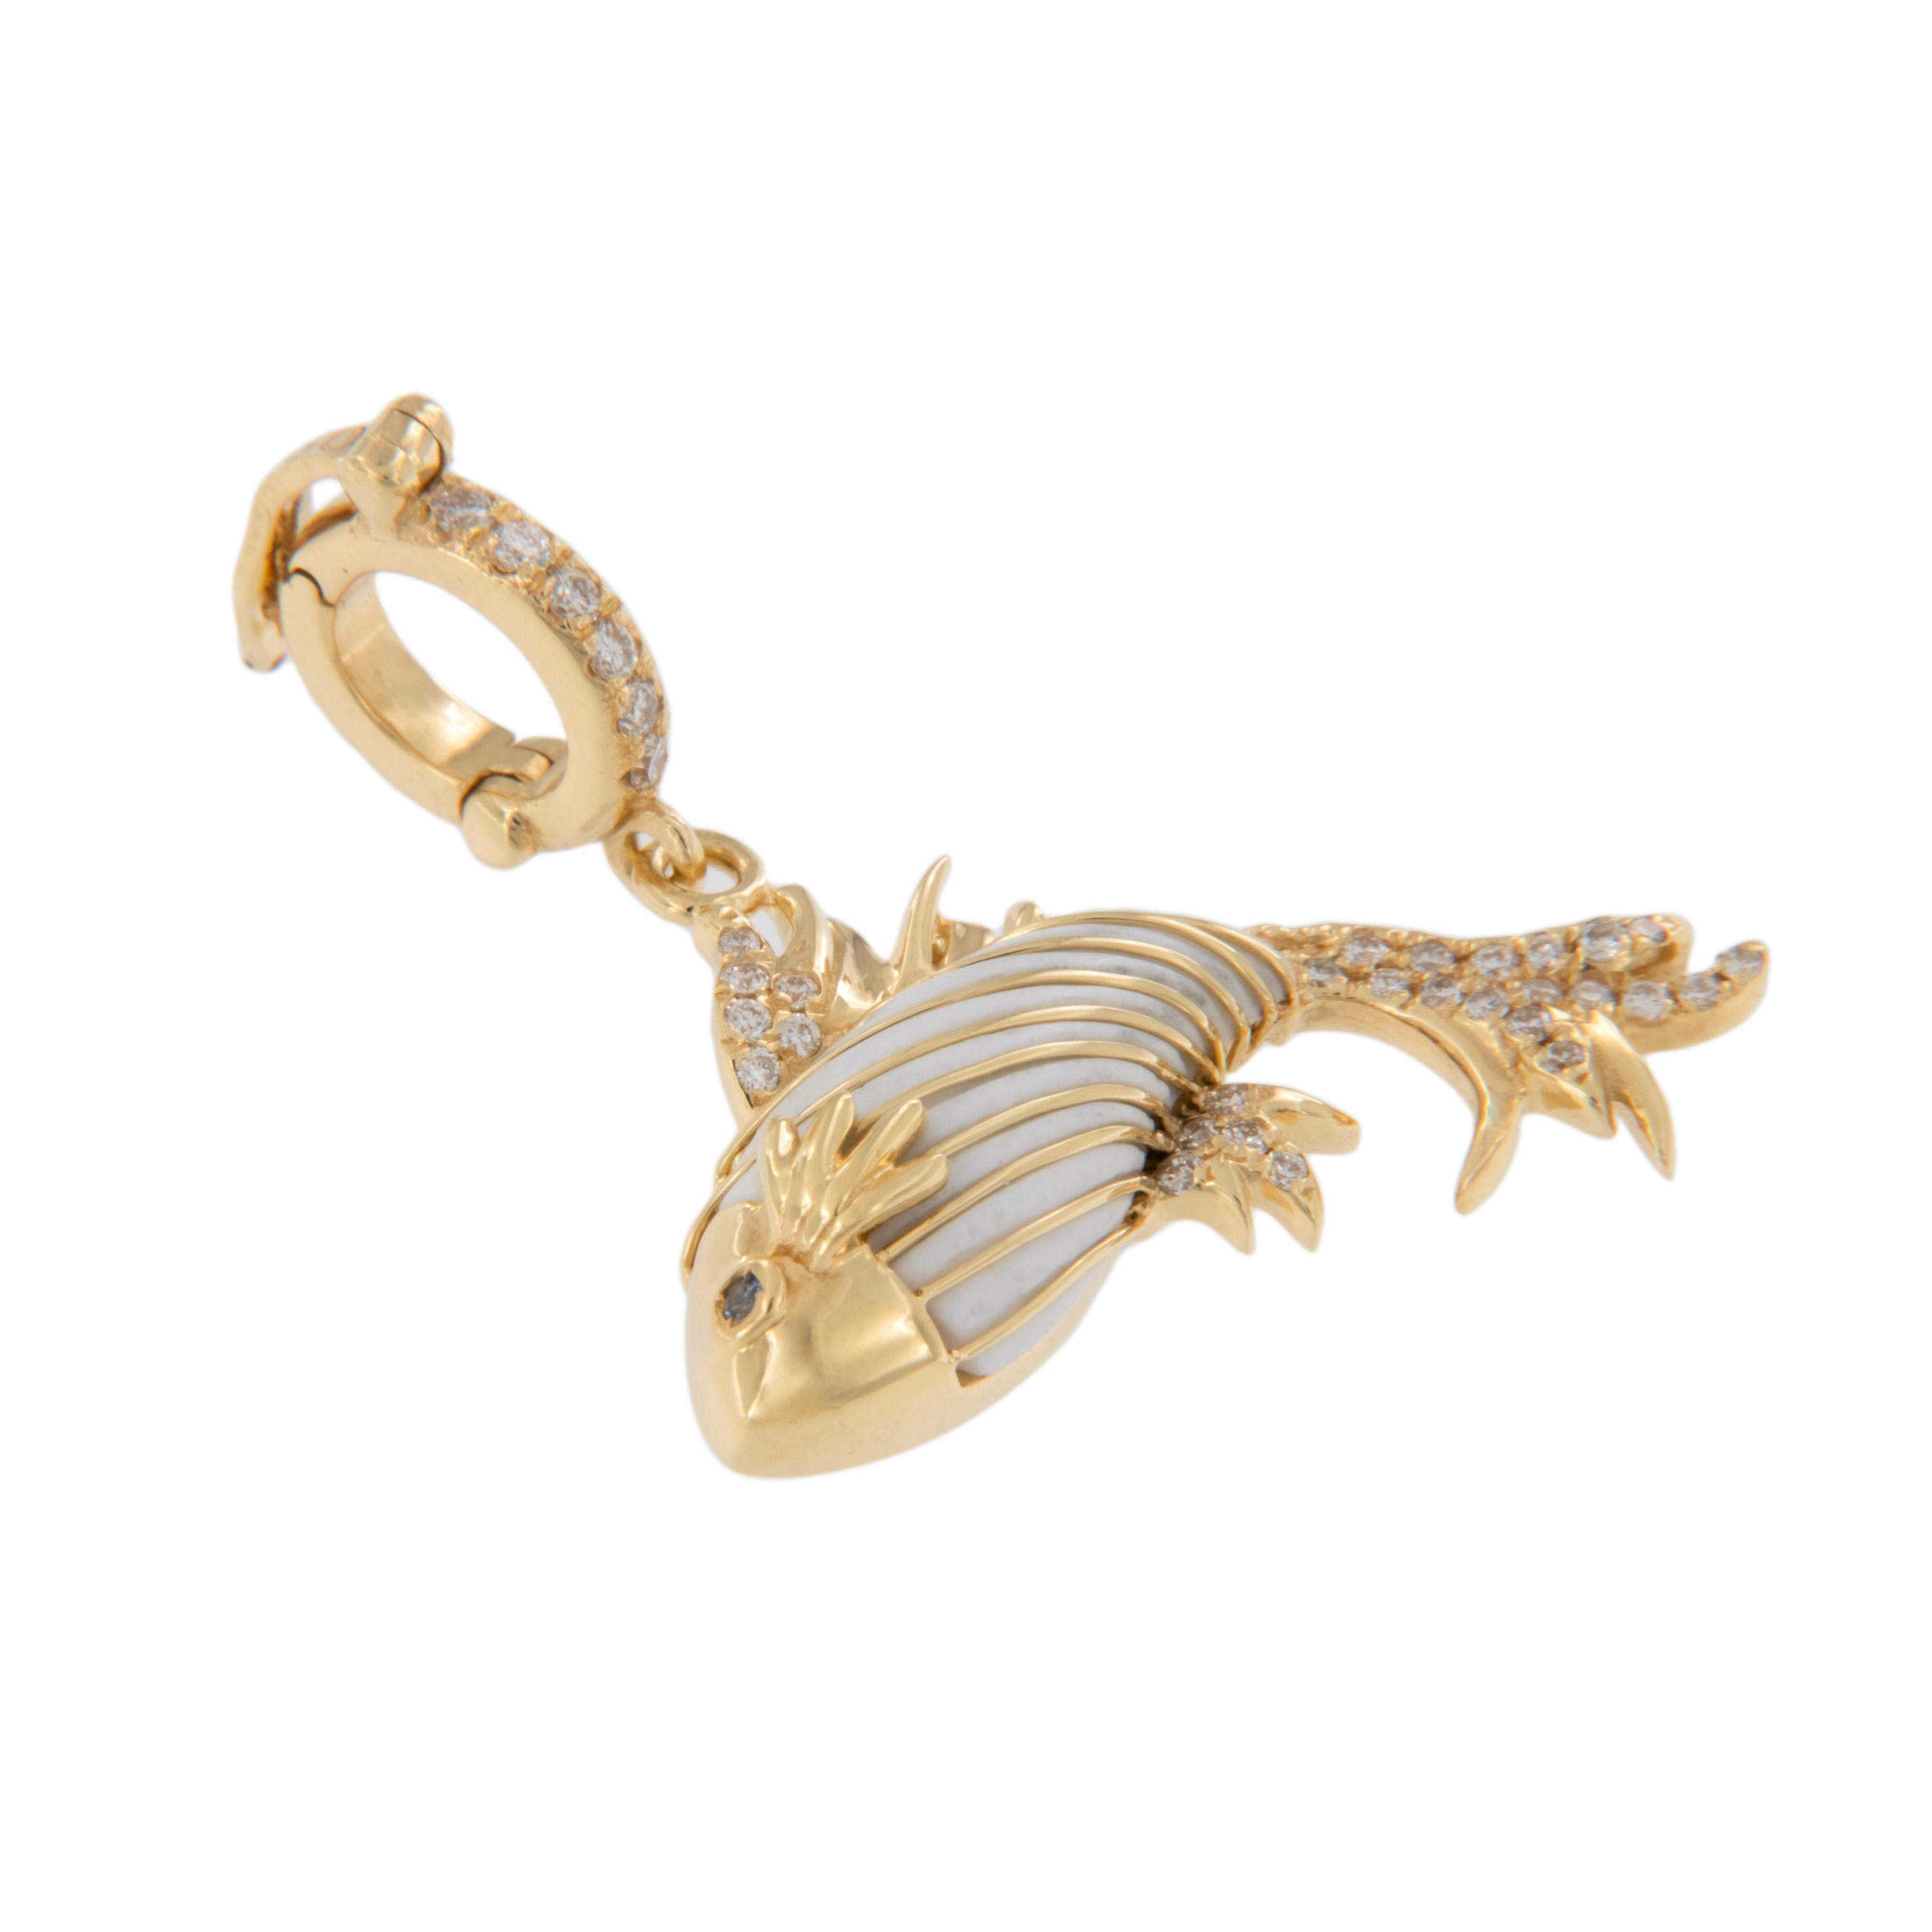 Crafted in rich 18 karat yellow gold this elegant Pisces fish is accented with white onyx & white diamonds = 0.11 Cttw. for a striking and fluid look! White diamonds accent the bail which is hinged making it easy to wear with your favorite chain or